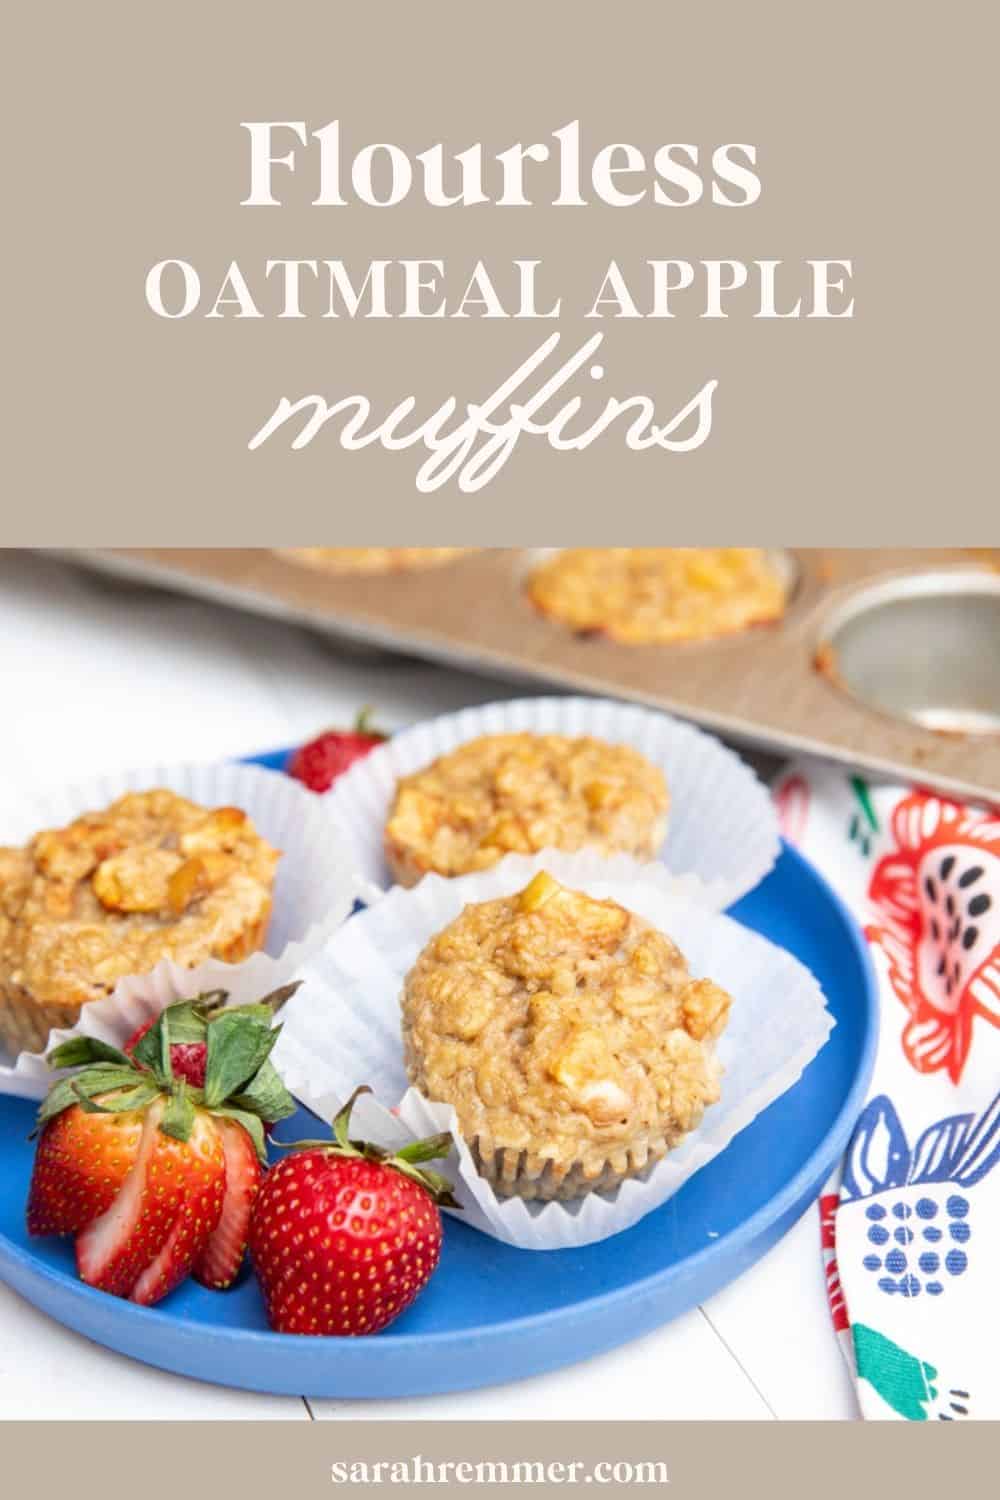 These muffins are high fibre, high protein and literally contain everything you need for a balanced meal. They are also really tasty, and definitely kid-approved! In fact, my three-year-old made them in about ten minutes with a little help from me! Check it out! 